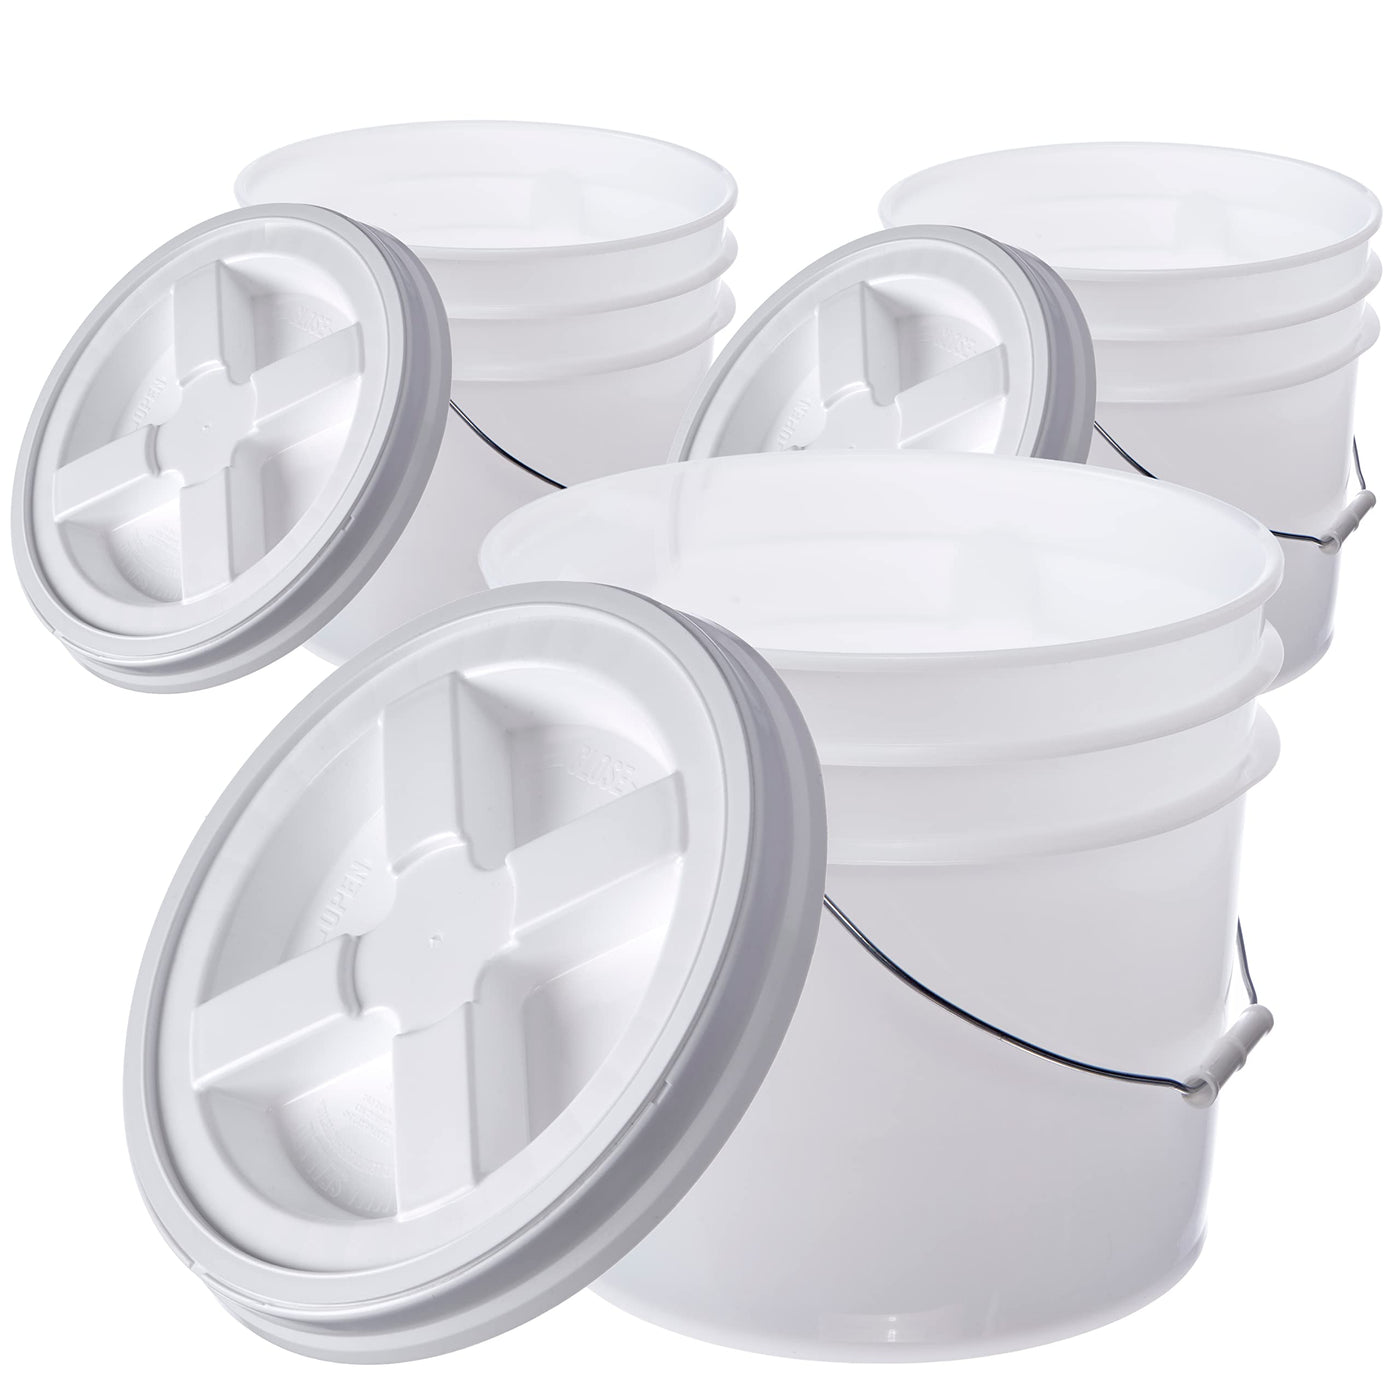 2 Gallon White Bucket With Gamma Seal Lid Free Shipping